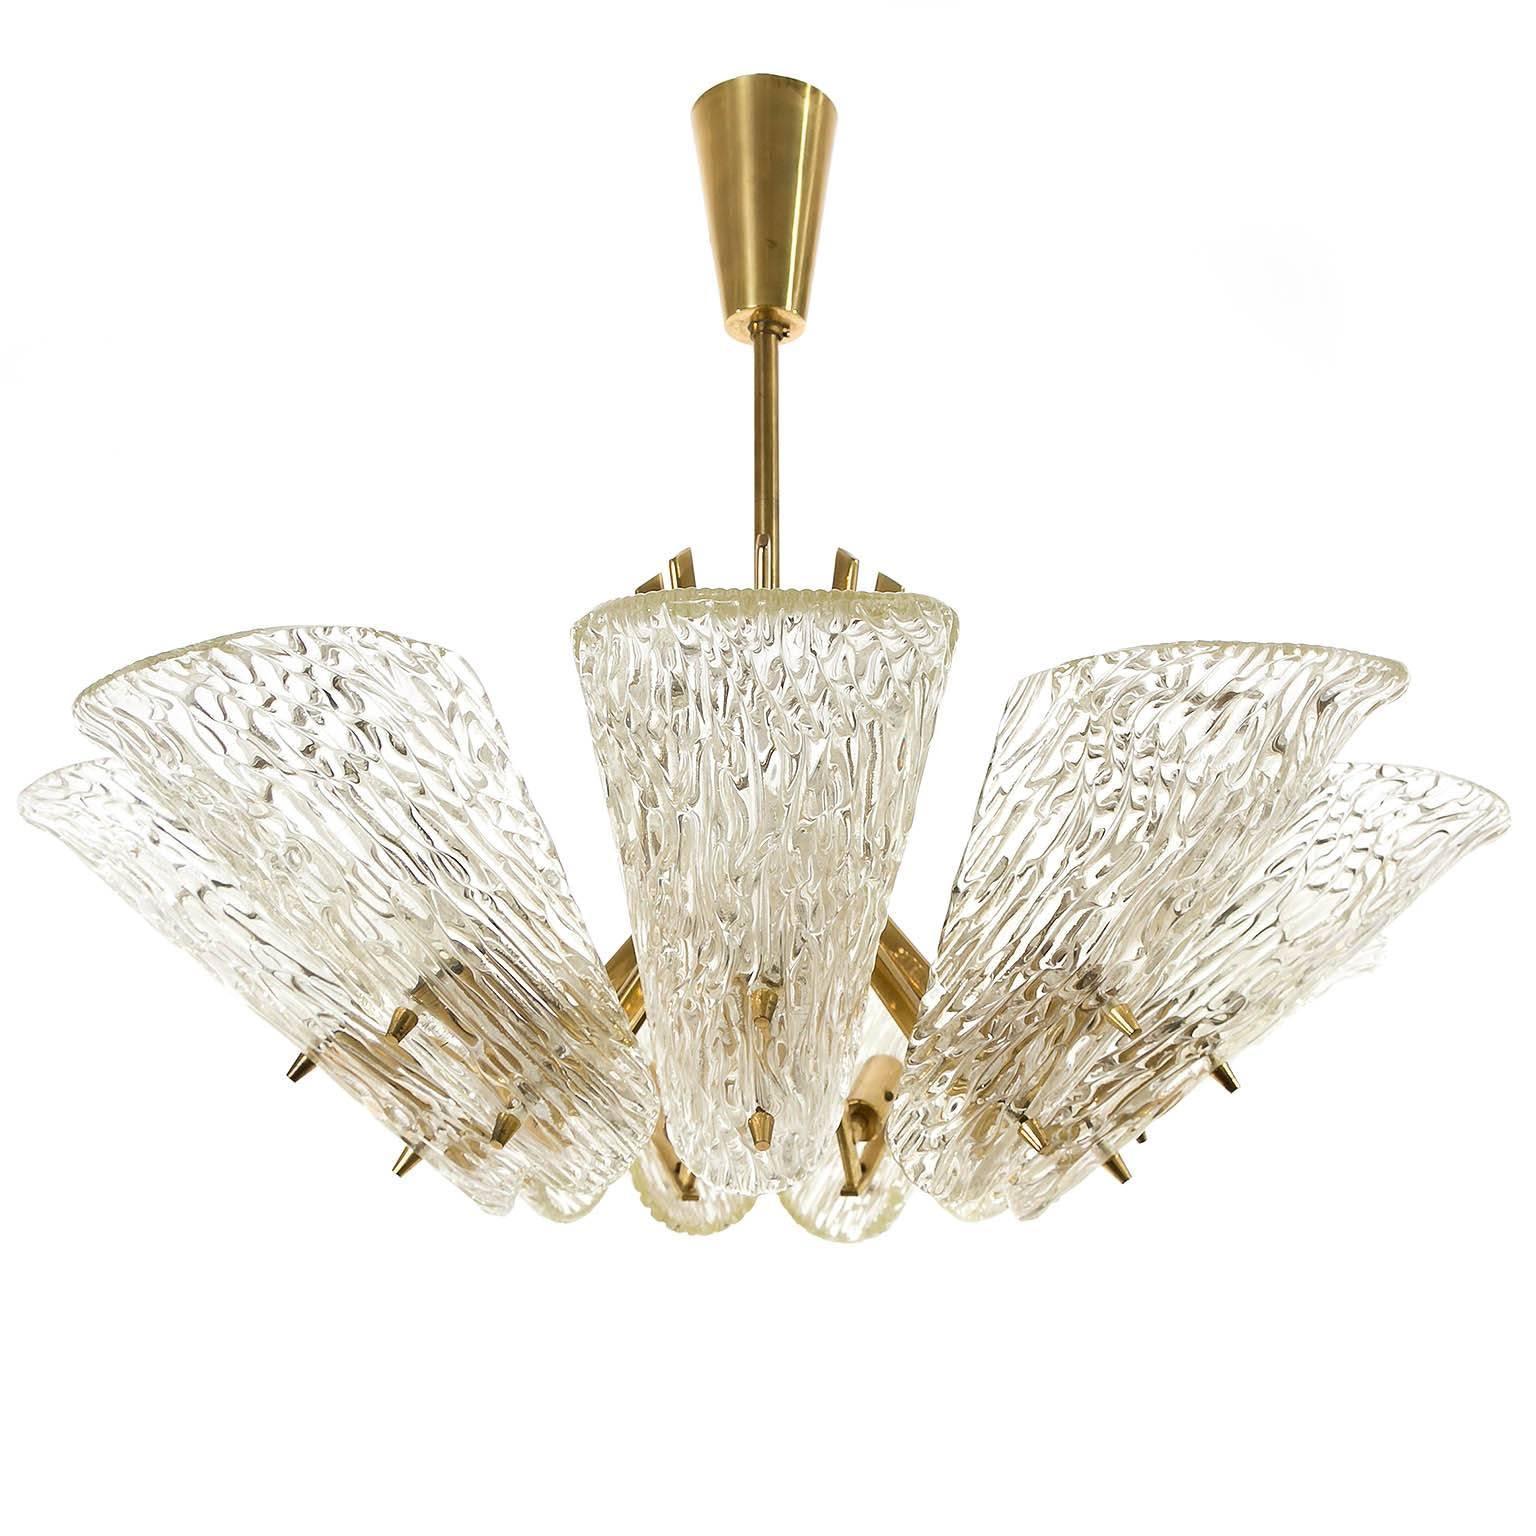 A glass and brass chandelier by J.T. Kalmar, Vienna, Austria, manufactured in midcentury, circa 1960 (late 1950s or early 1960s).
The light has nine arms with sockets for small Edison screw base E14 bulbs or LEDs (max. 40W per bulb) which are